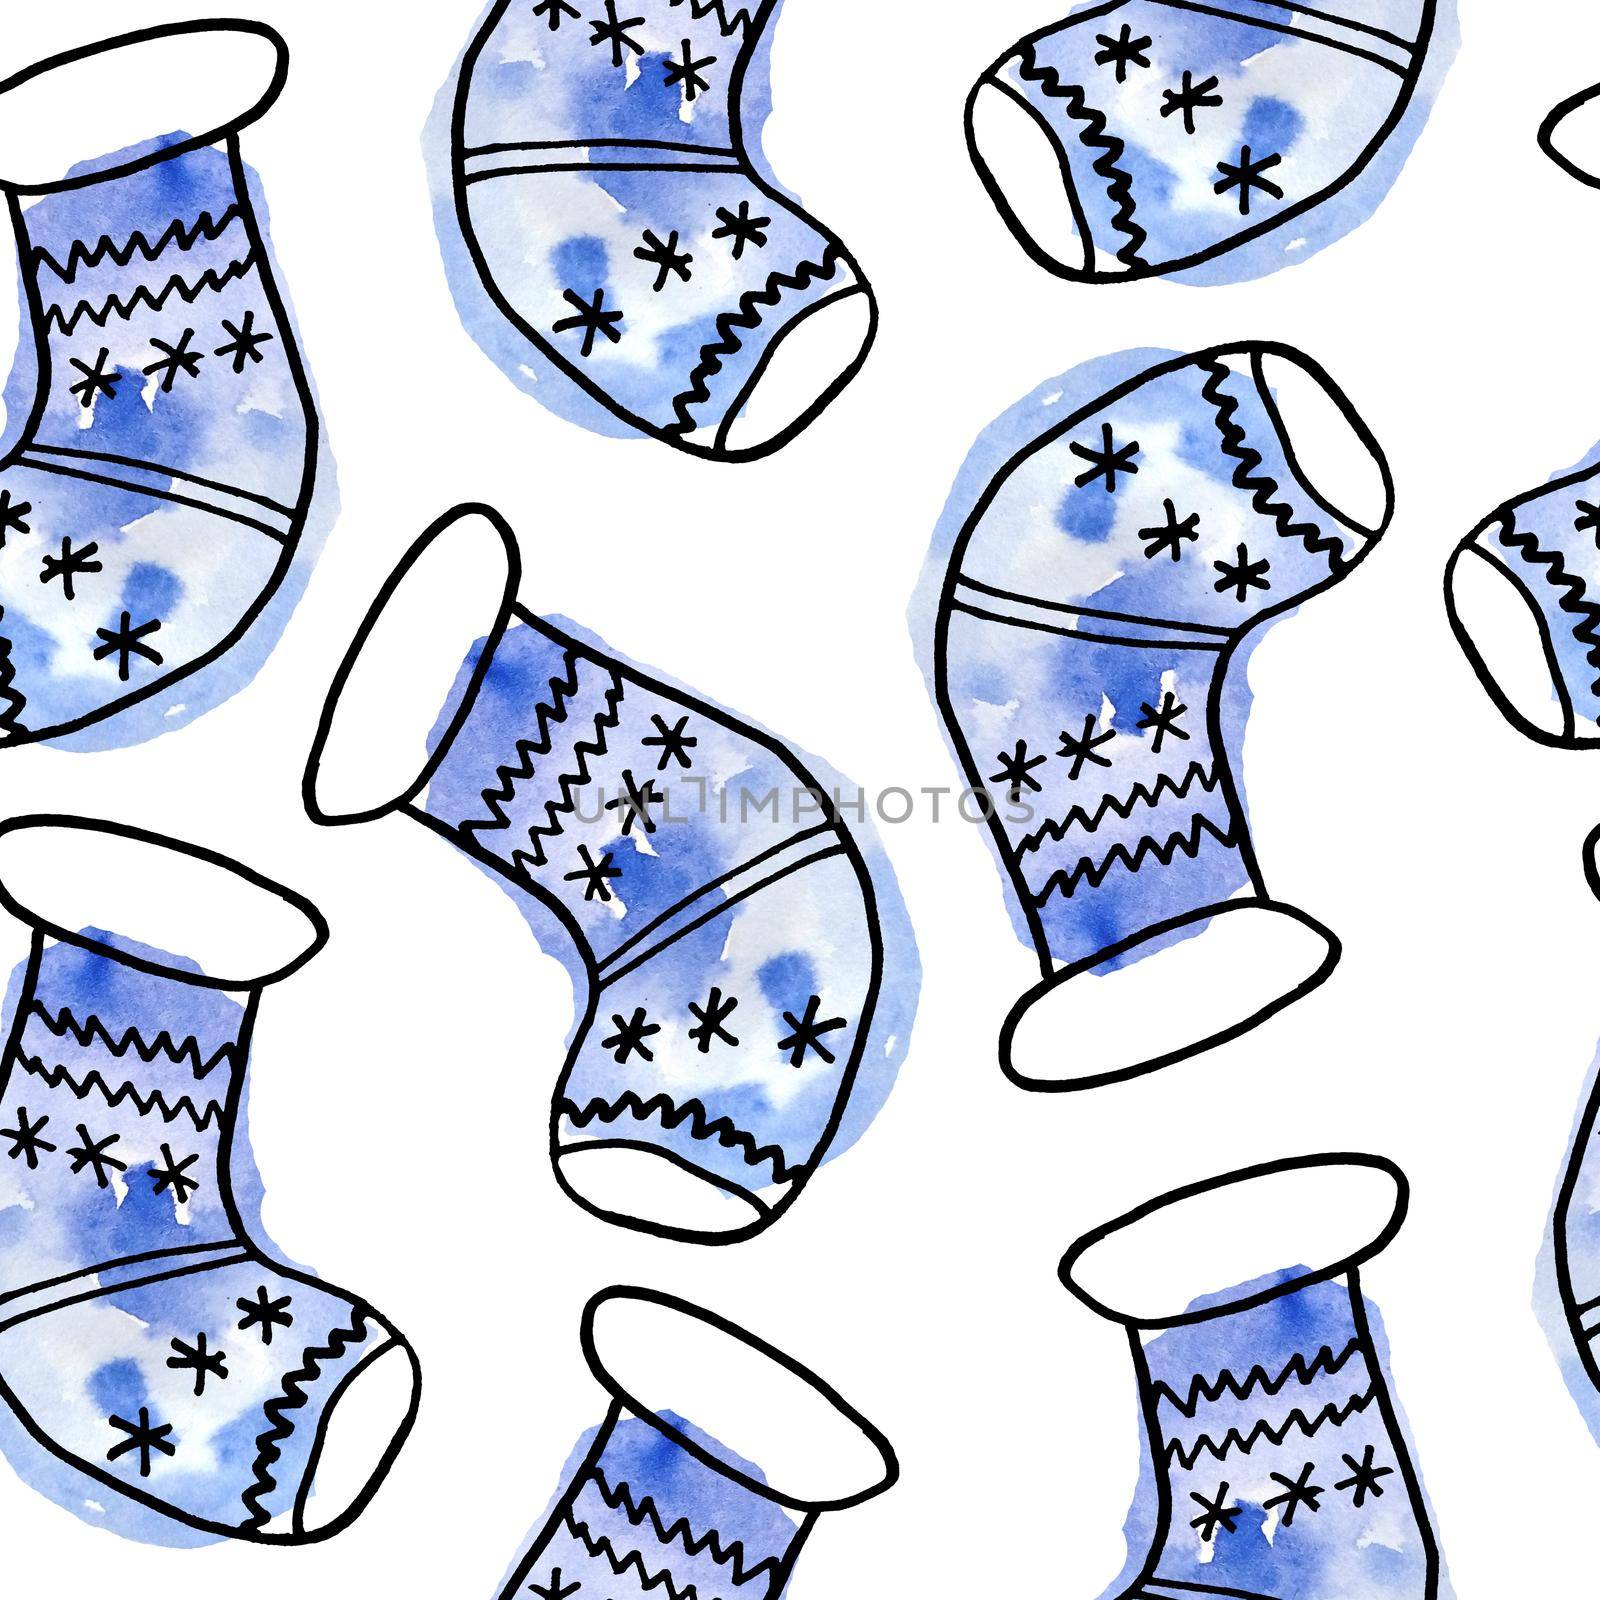 Watercolor seamless hand drawn pattern with Christmas New Year ornaments socks blue turquoise on white background. Black doodle lines trendy modern cartoon style contemporary winter december design